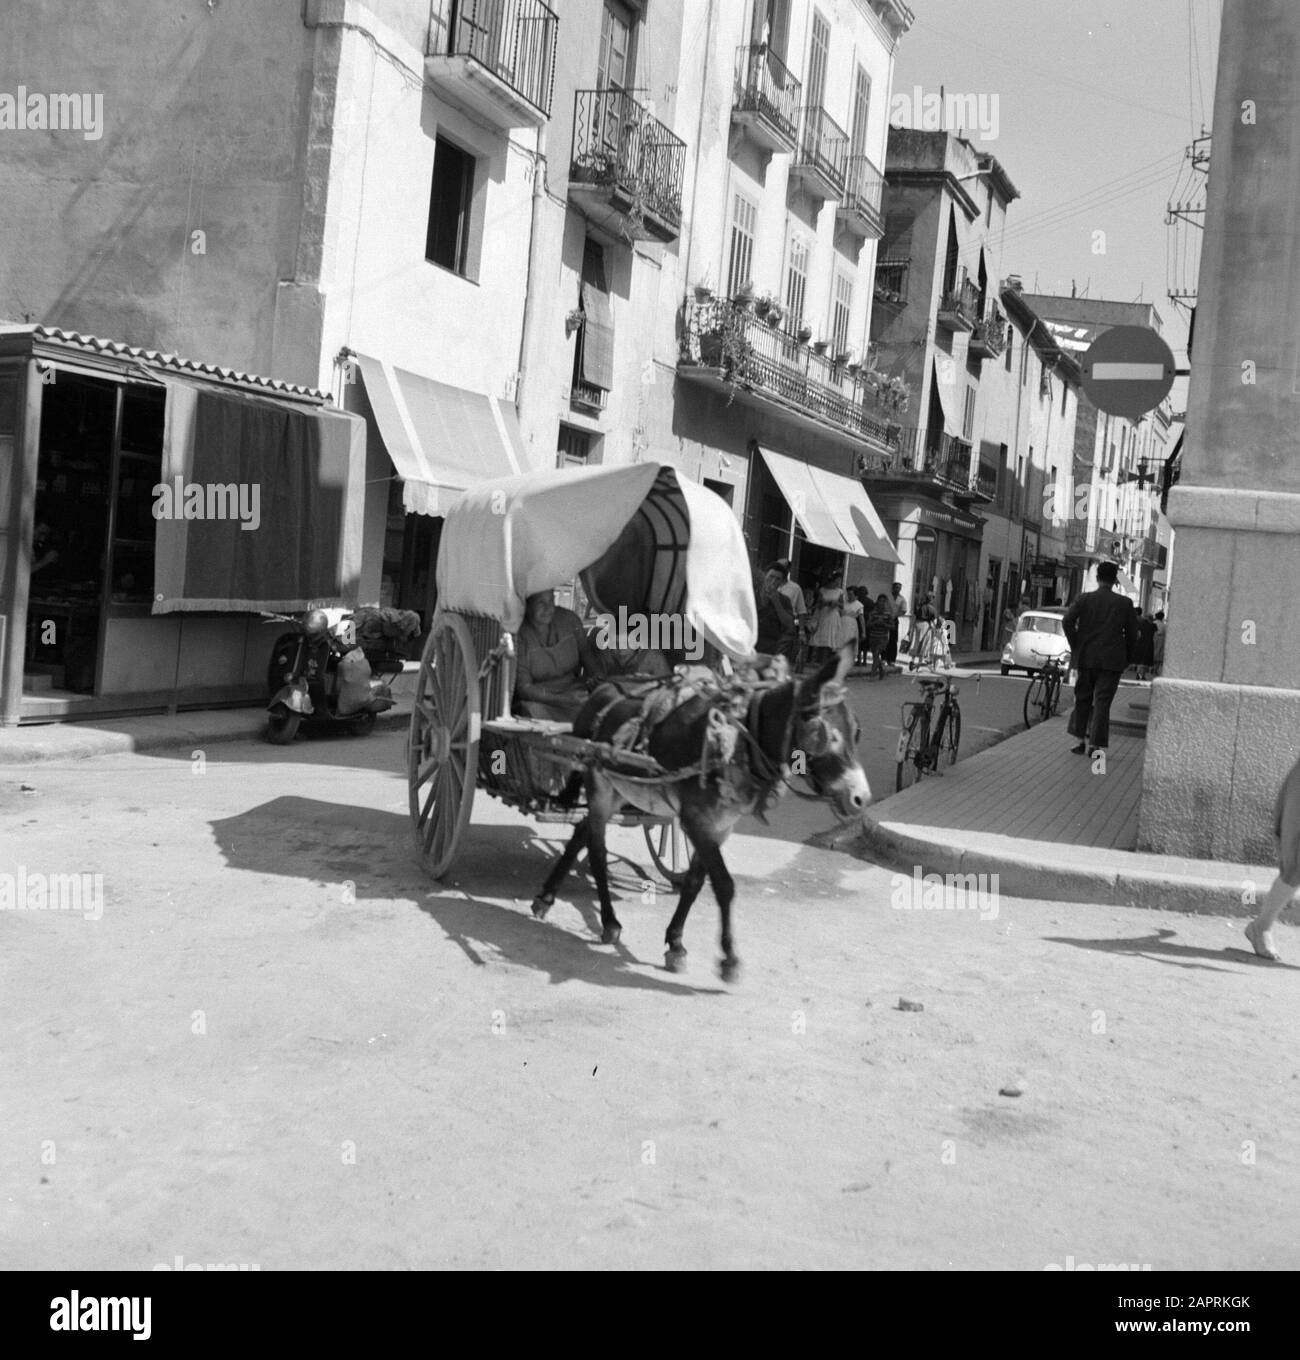 Carts and animal-drawn vehicles in Spain Mule drawn cart in Barcelona Date:  undated Location: Barcelona, Spain Keywords: donkeys, carts, street images  Stock Photo - Alamy